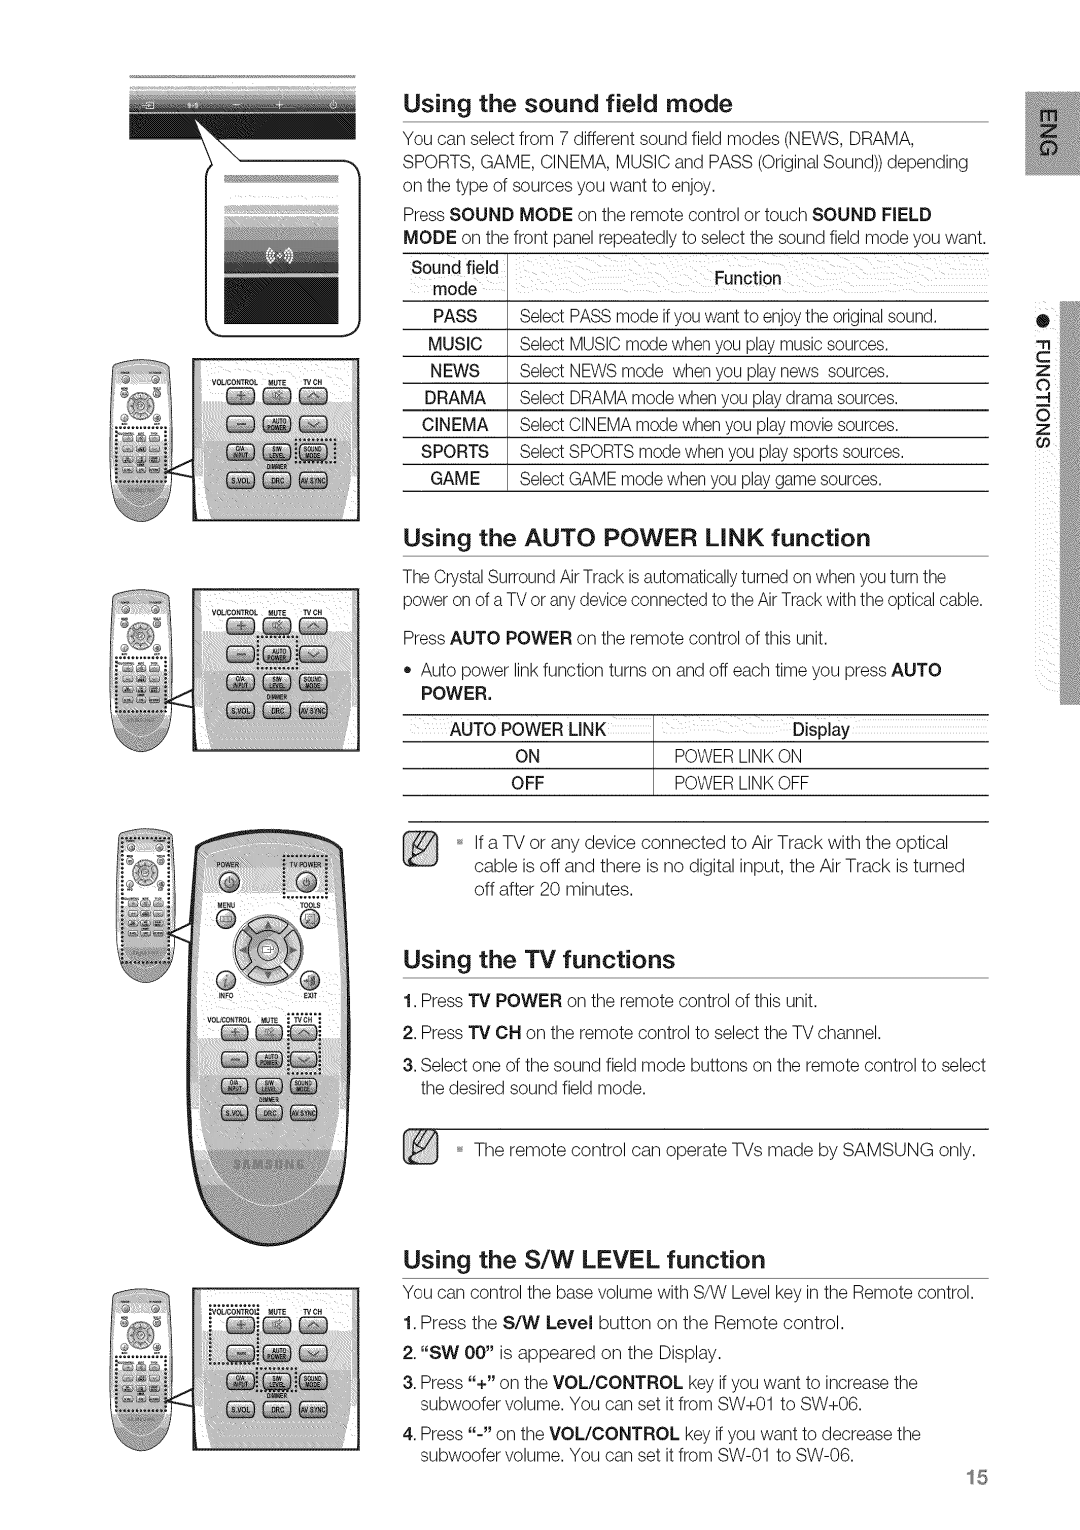 Samsung HW-C450 manual Using the sound field mode, Using the AUTO POWER LINK function, Using the rv functions, Power= 